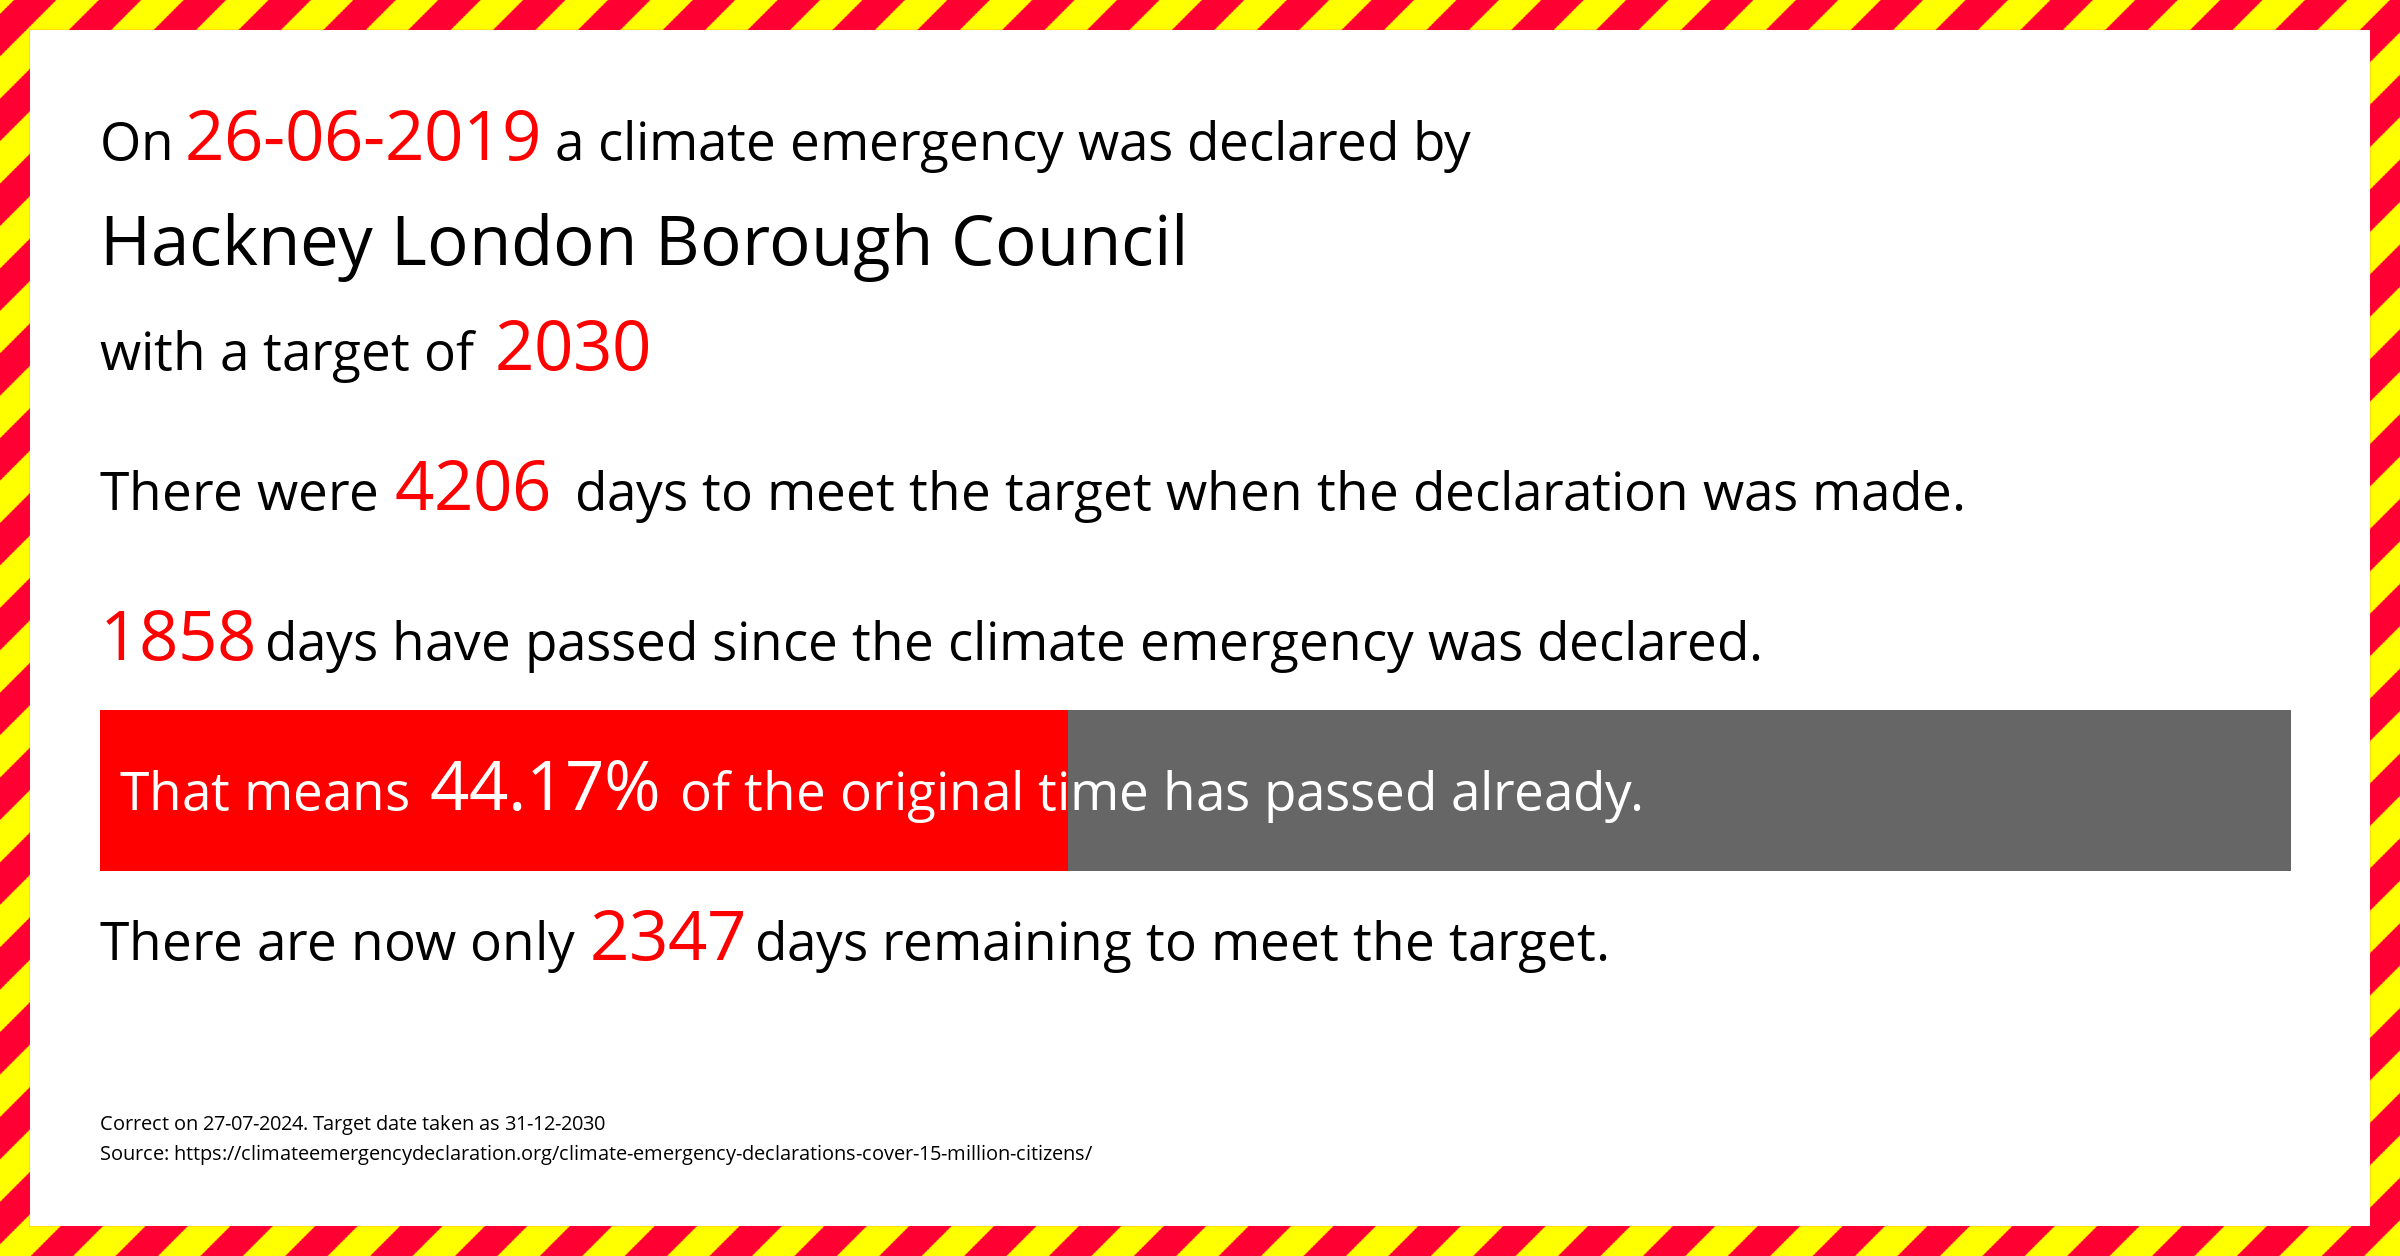 Hackney London Borough Council declared a Climate emergency on Wednesday 26th June 2019, with a target of 2030.